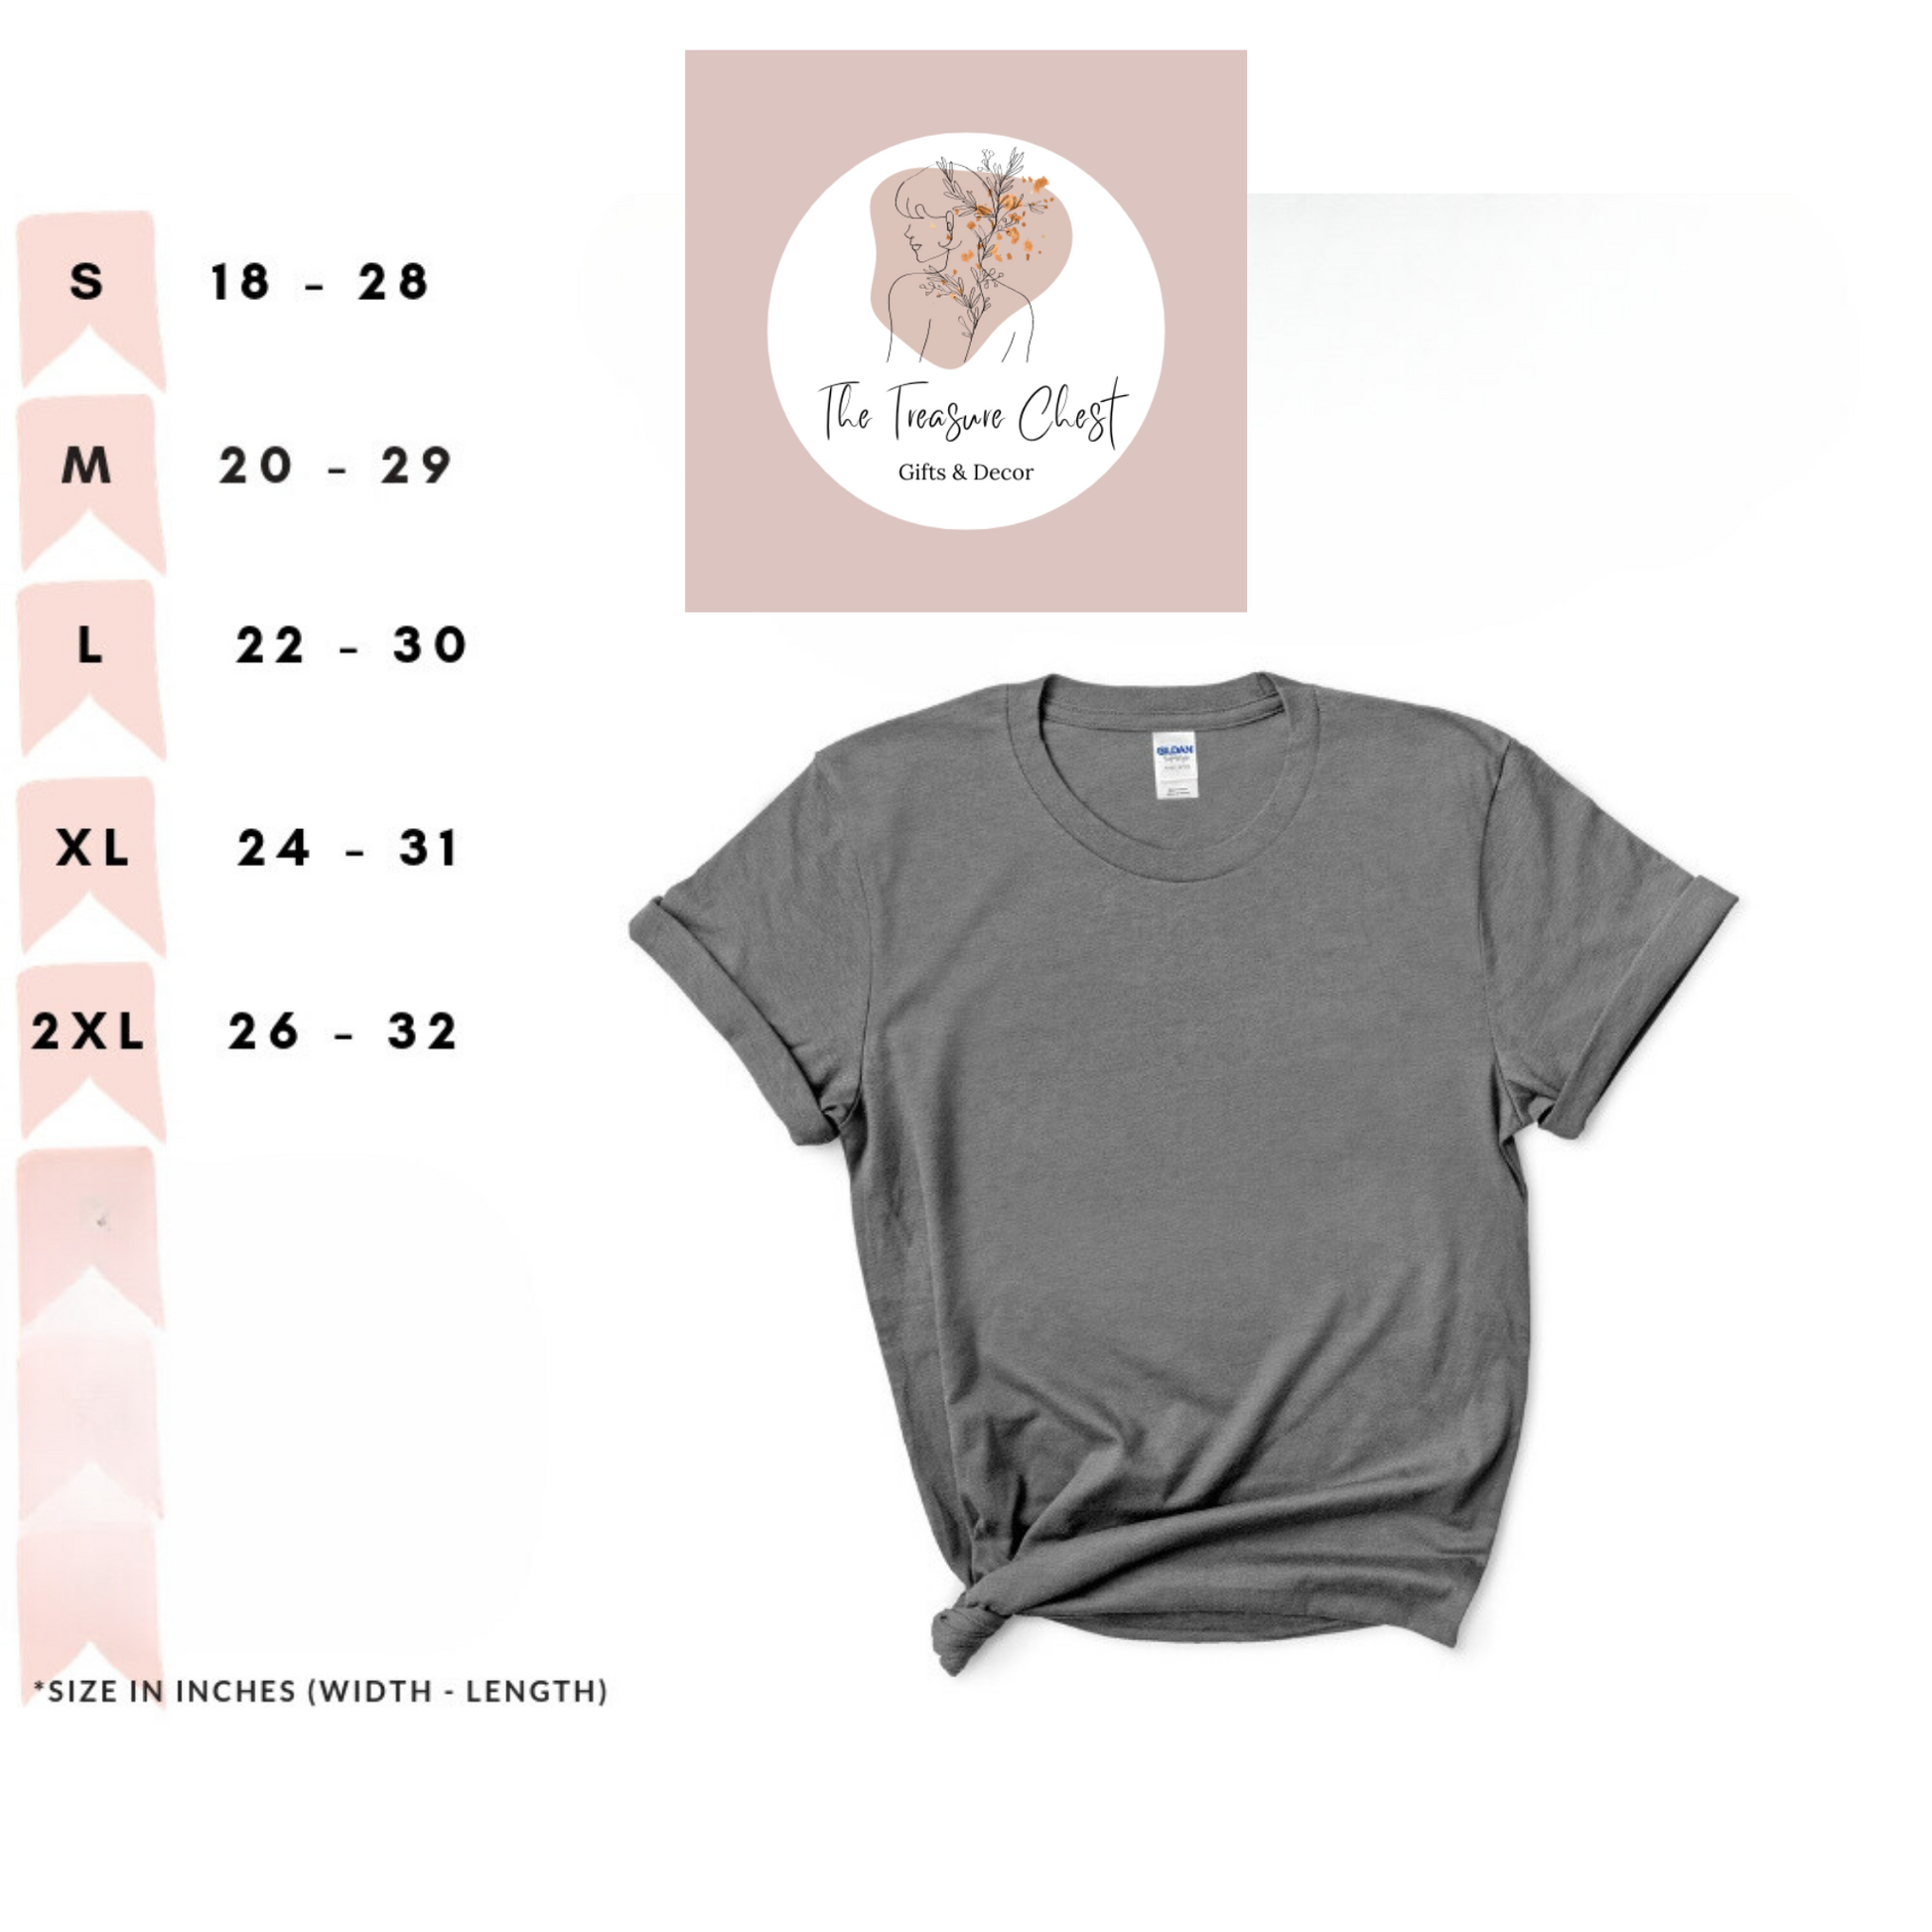 The Cool Dad Crewneck T Shirt size chart